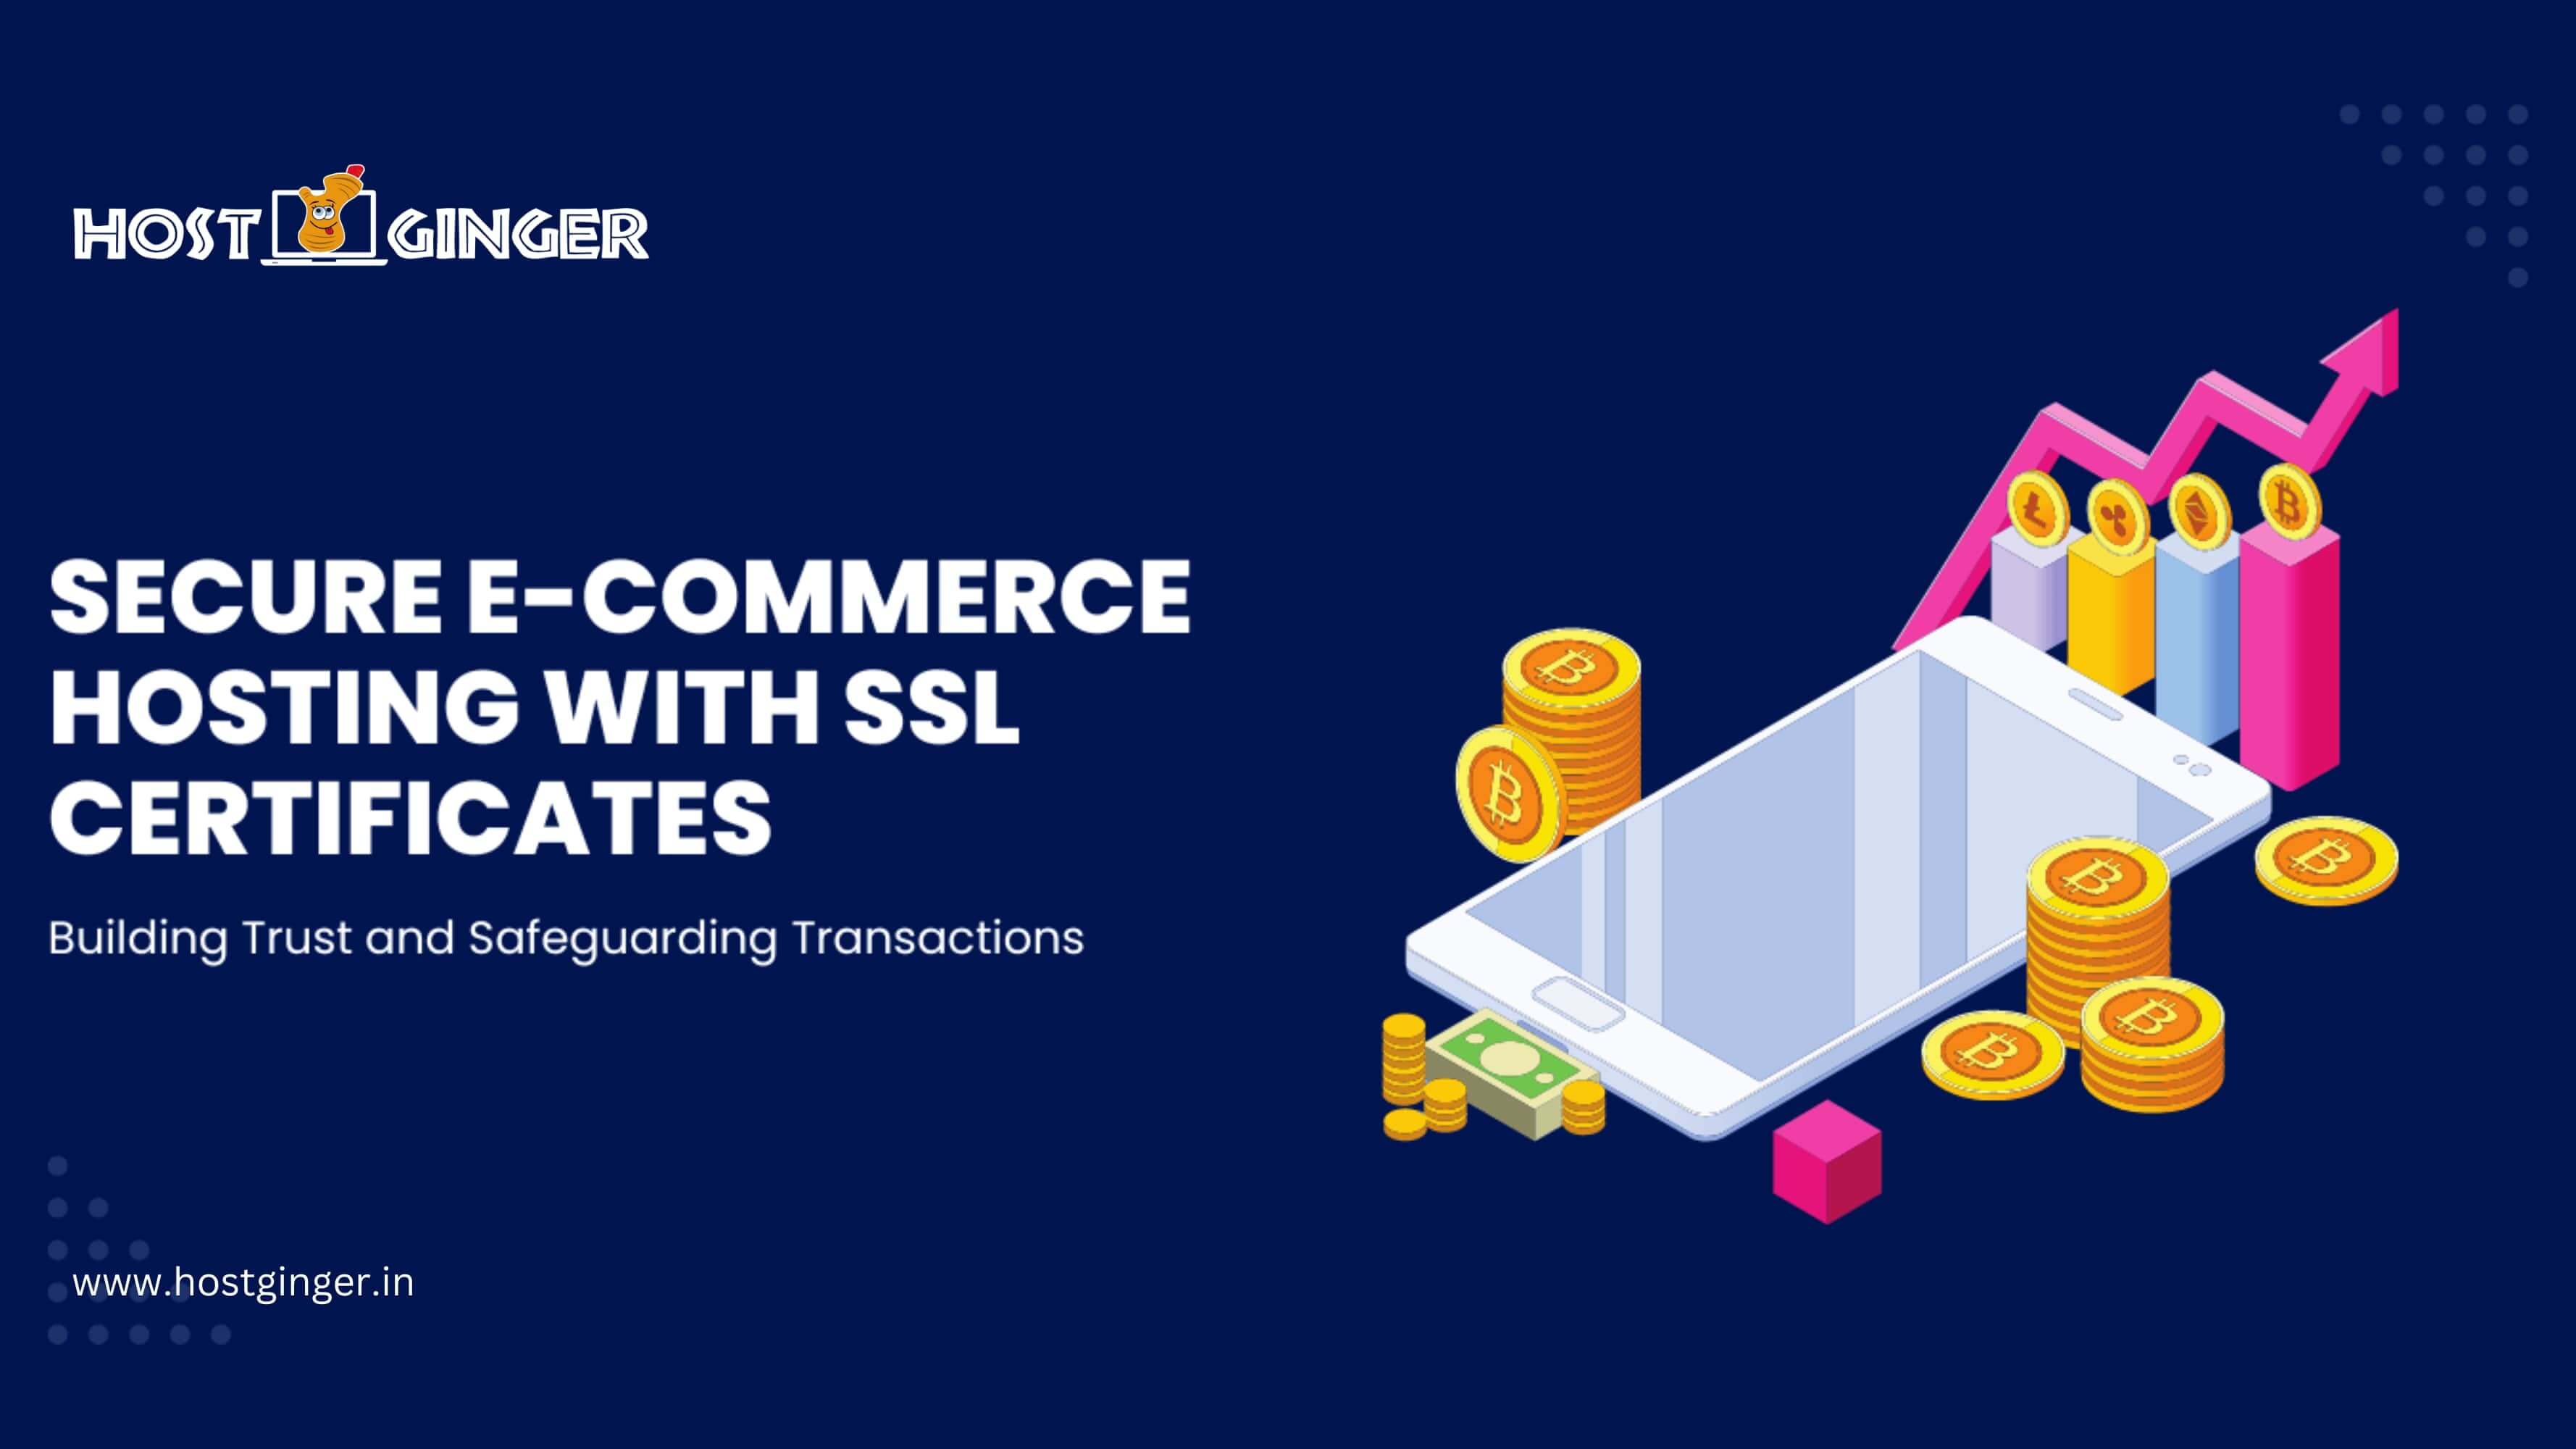 Secure E-commerce Hosting with SSL Certificates